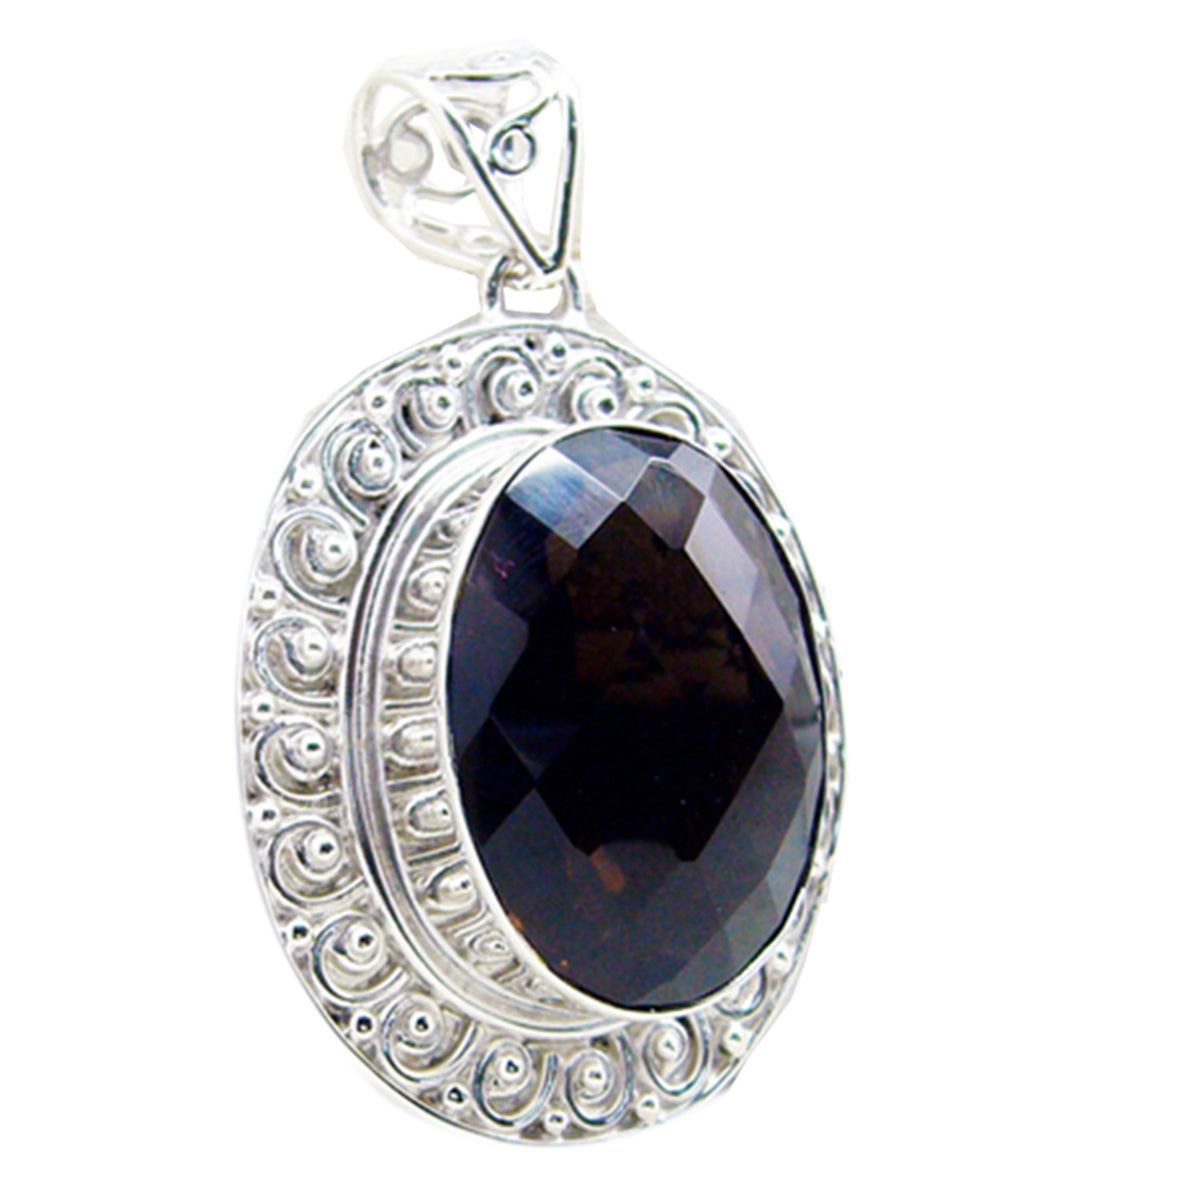 Riyo Real Gemstones Oval checker Brown smoky quartz 925 Silver Pendant gift for independence